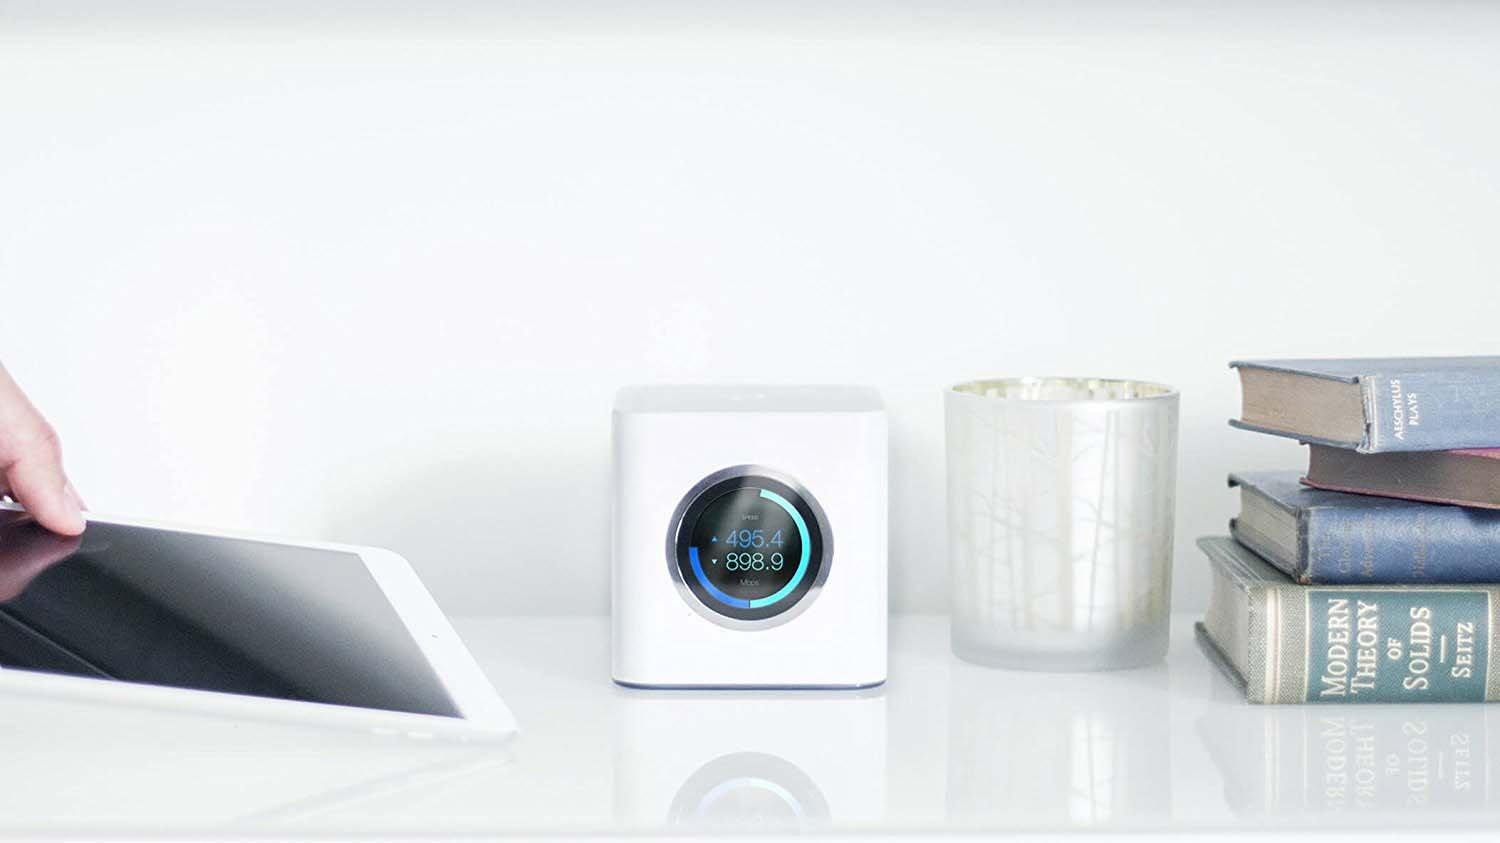 Amplifi AFI Router with 2 Mesh Points